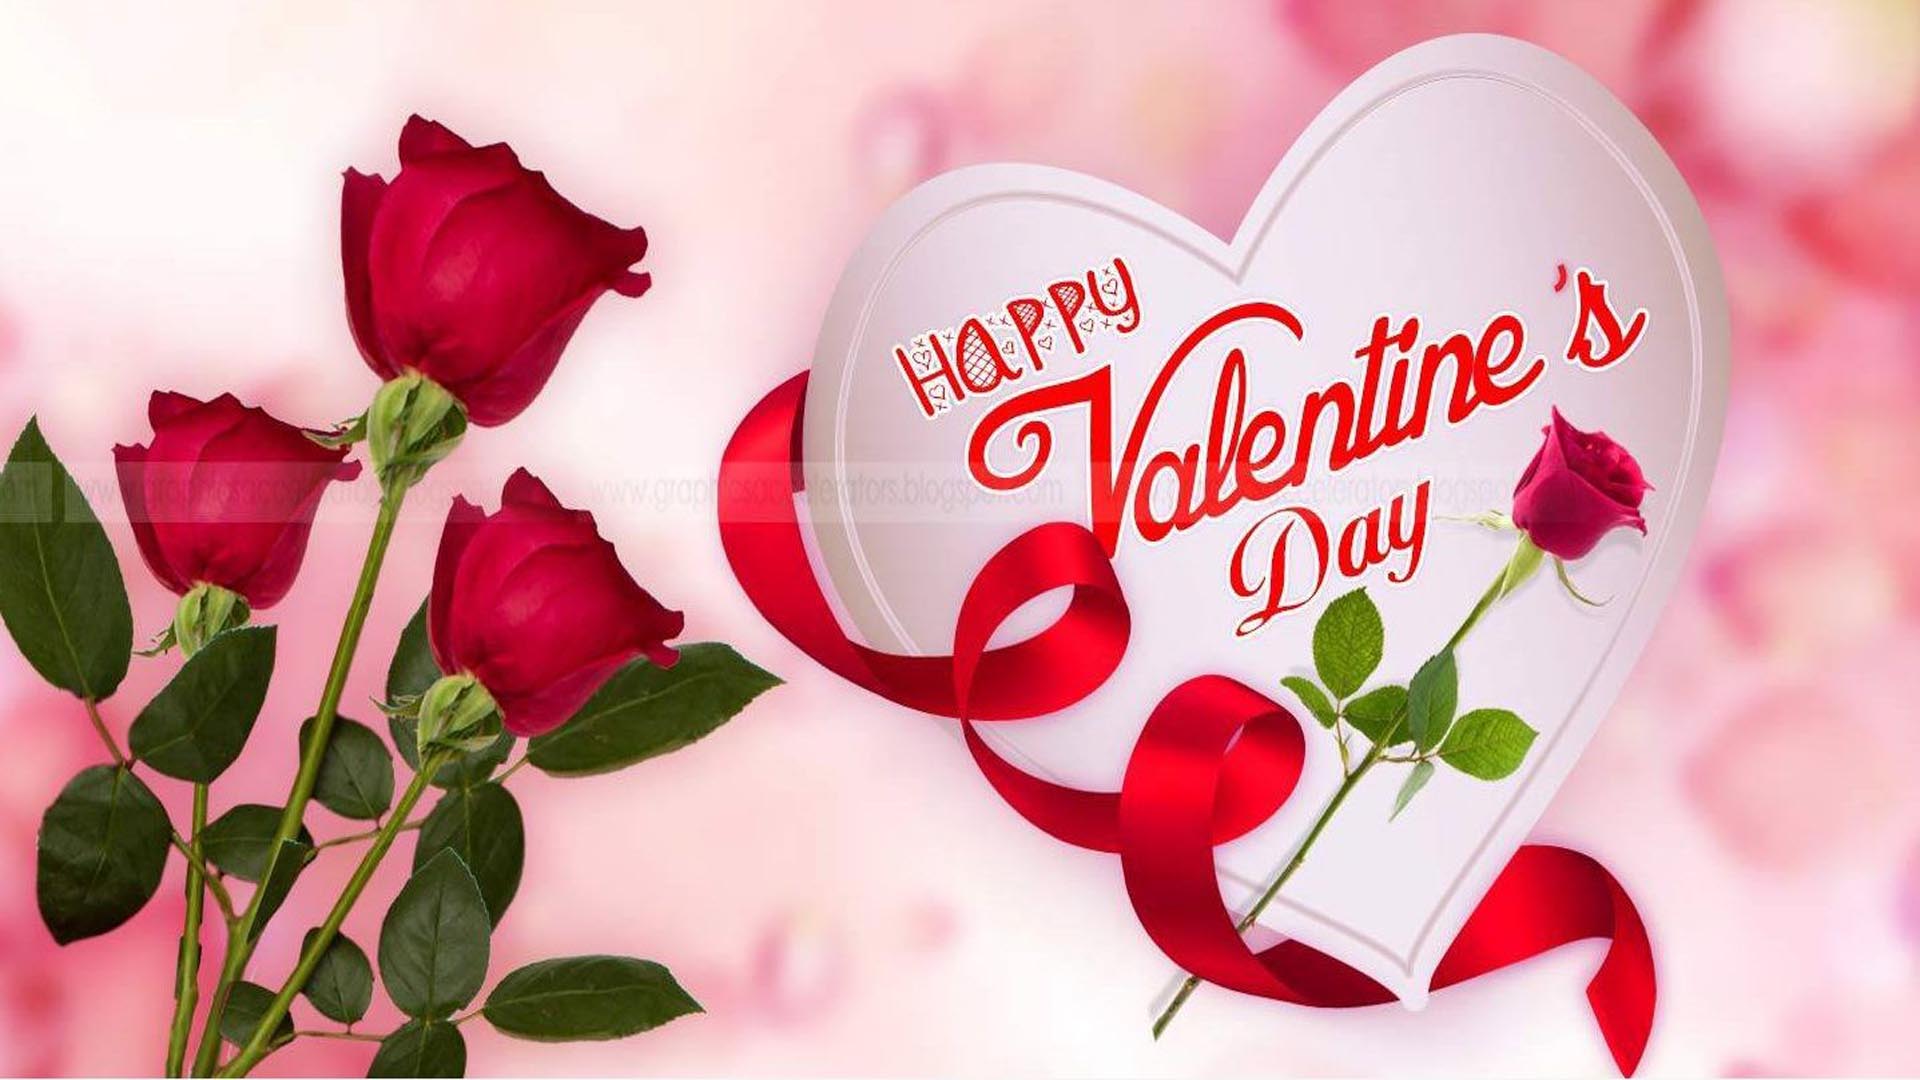 Happy Valentines Day High Quality Top Hd Wallpapers For Mobile Phones :  